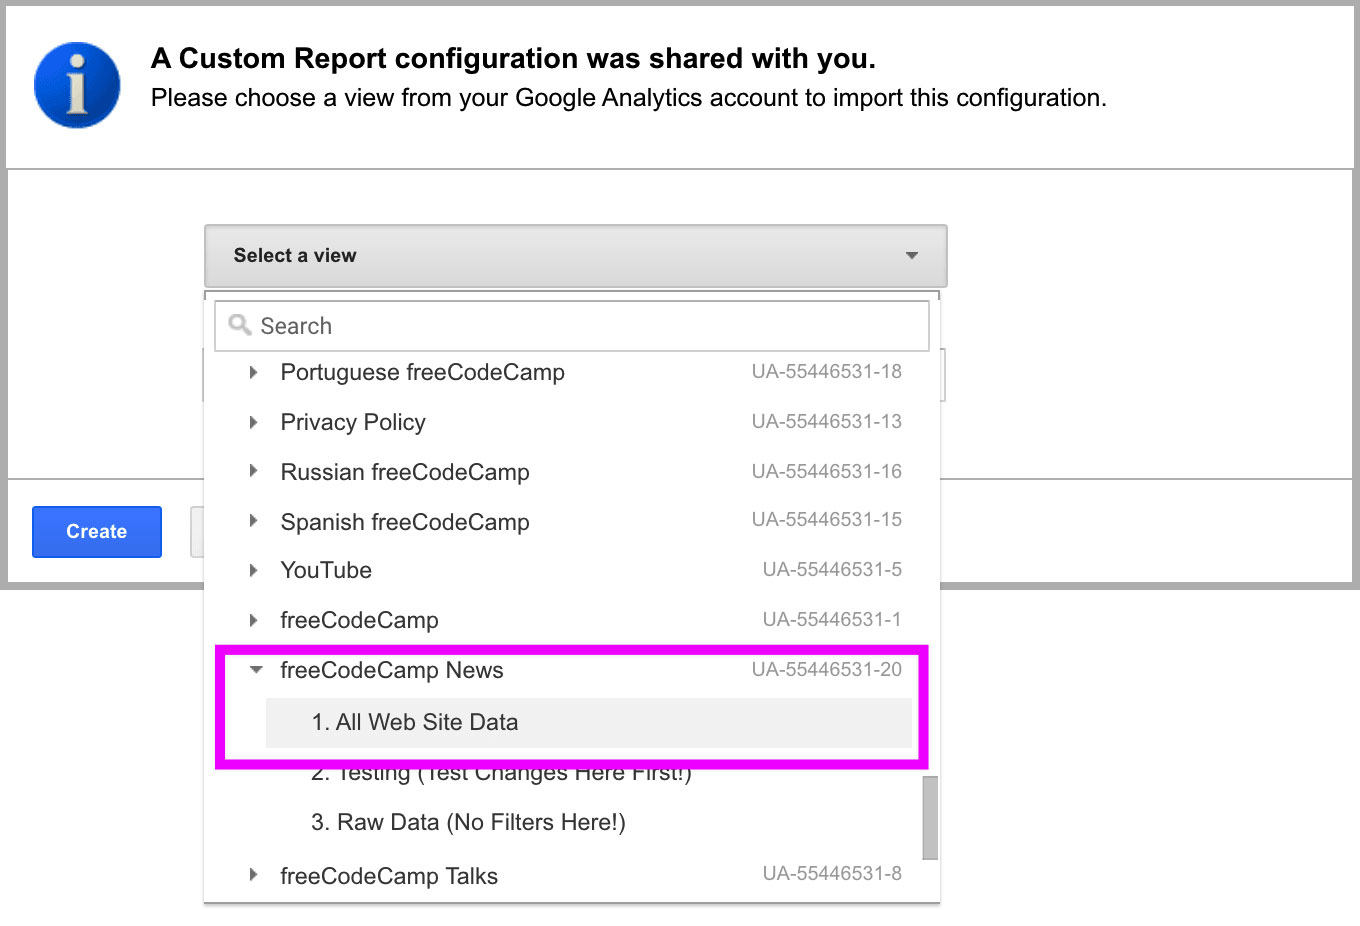 Selecting a Property and View when importing a Custom Report in Google Analytics